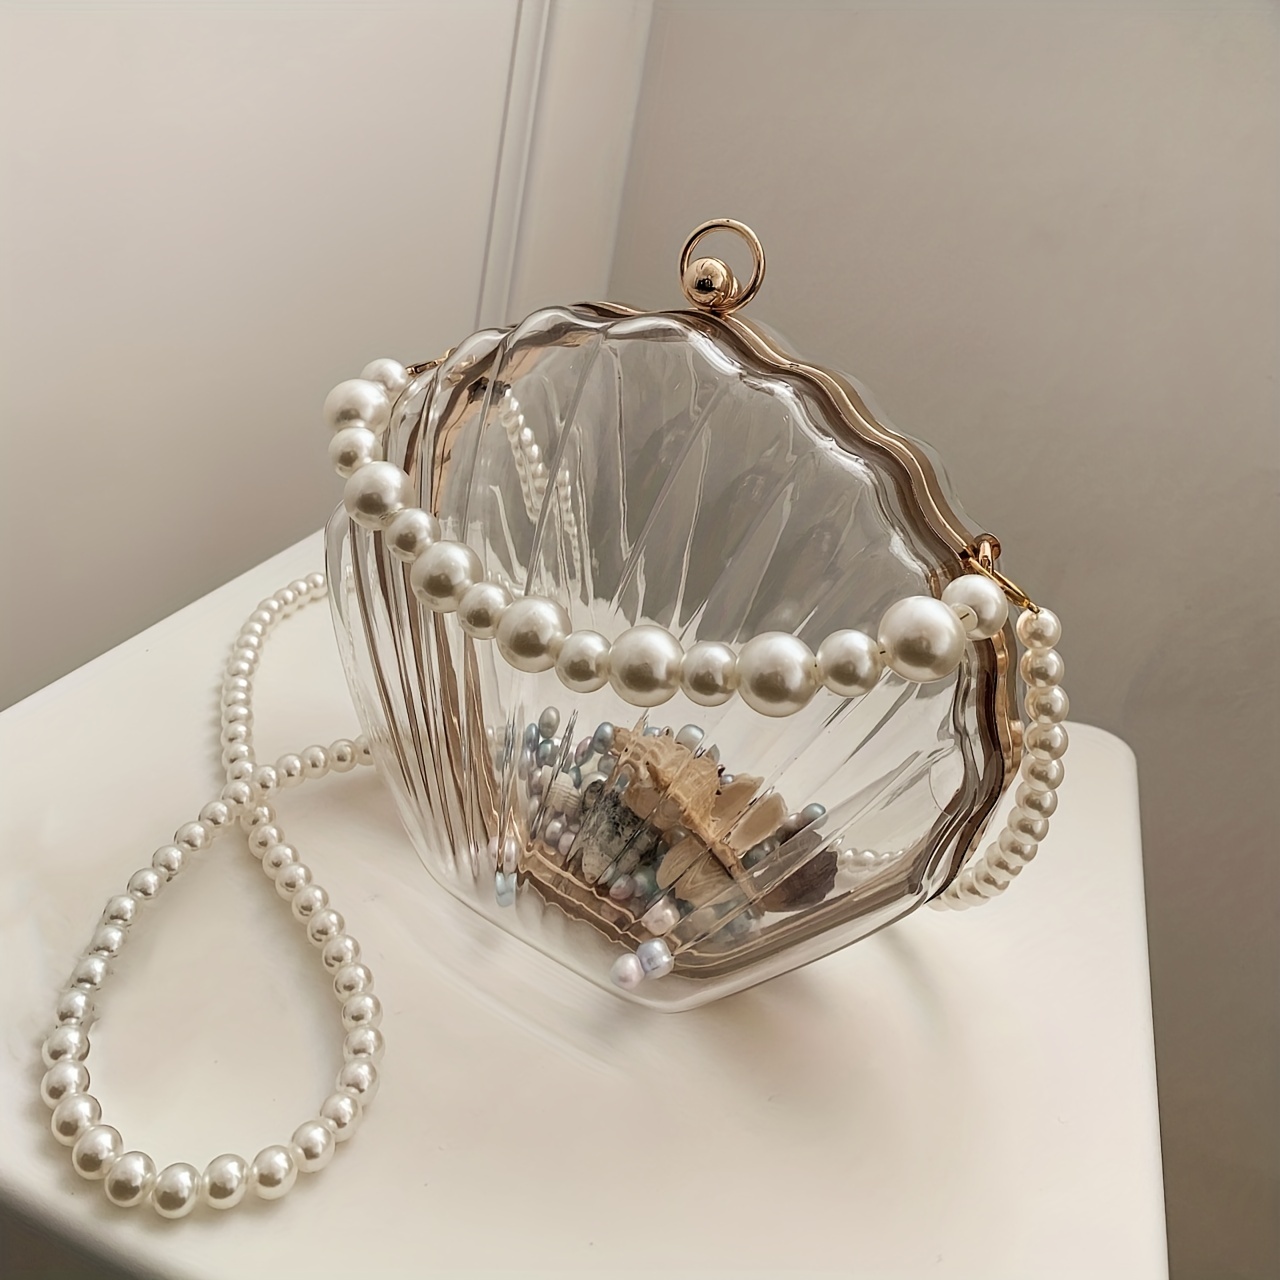 Transparent Clear Acrylic Square Box Clutch Purse Bag With Resin Short  Handle & Gold Metal Chain Strap - Buy Transparent Clear Acrylic Bag,Acrylic